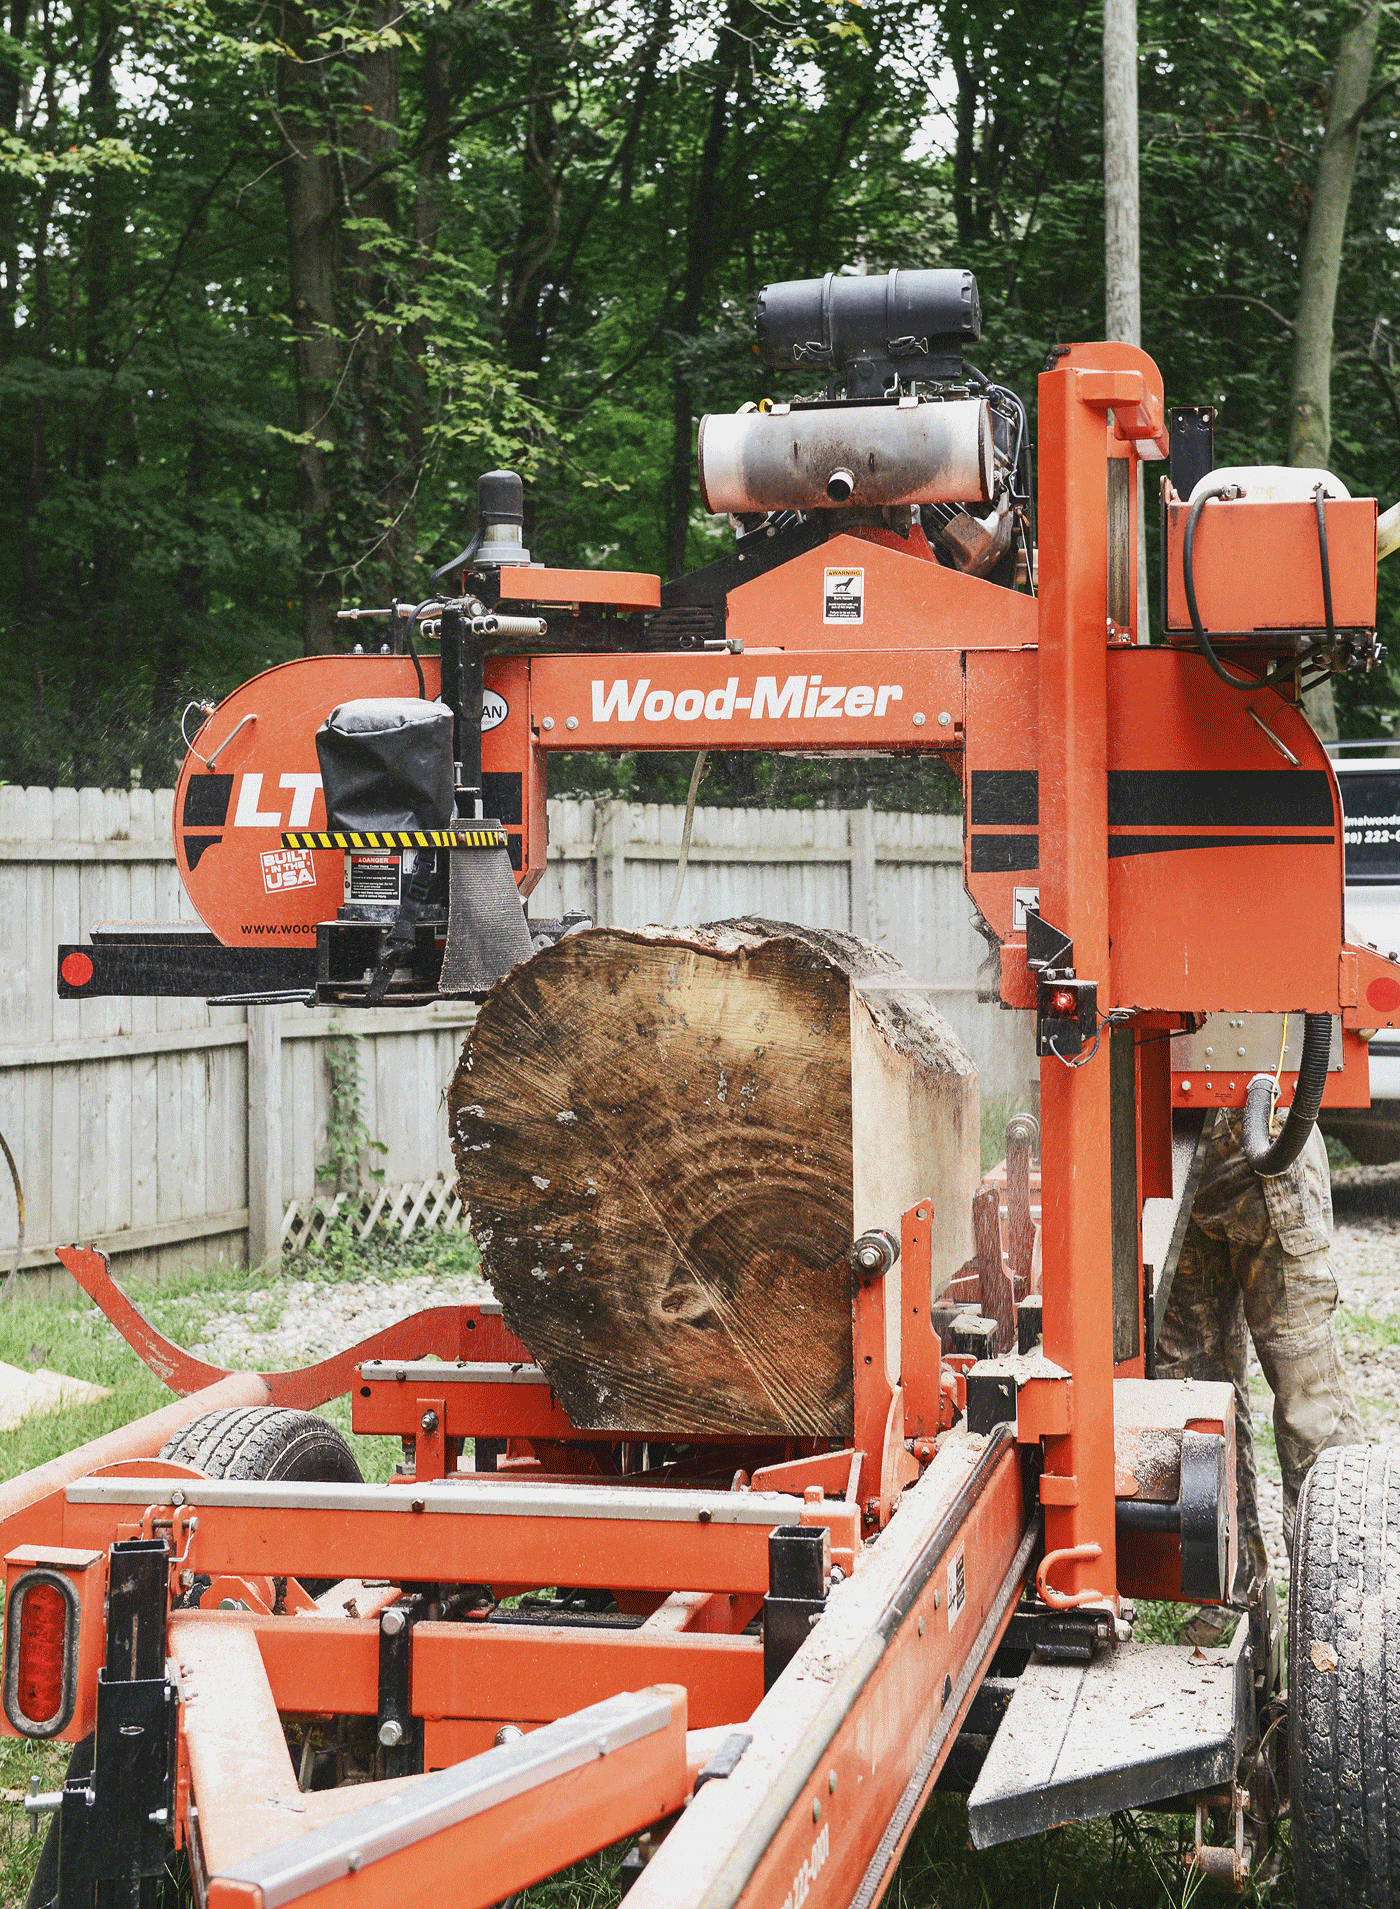 Portable wood milling: How does it work? We're sharing our experience on Yellow Brick Home